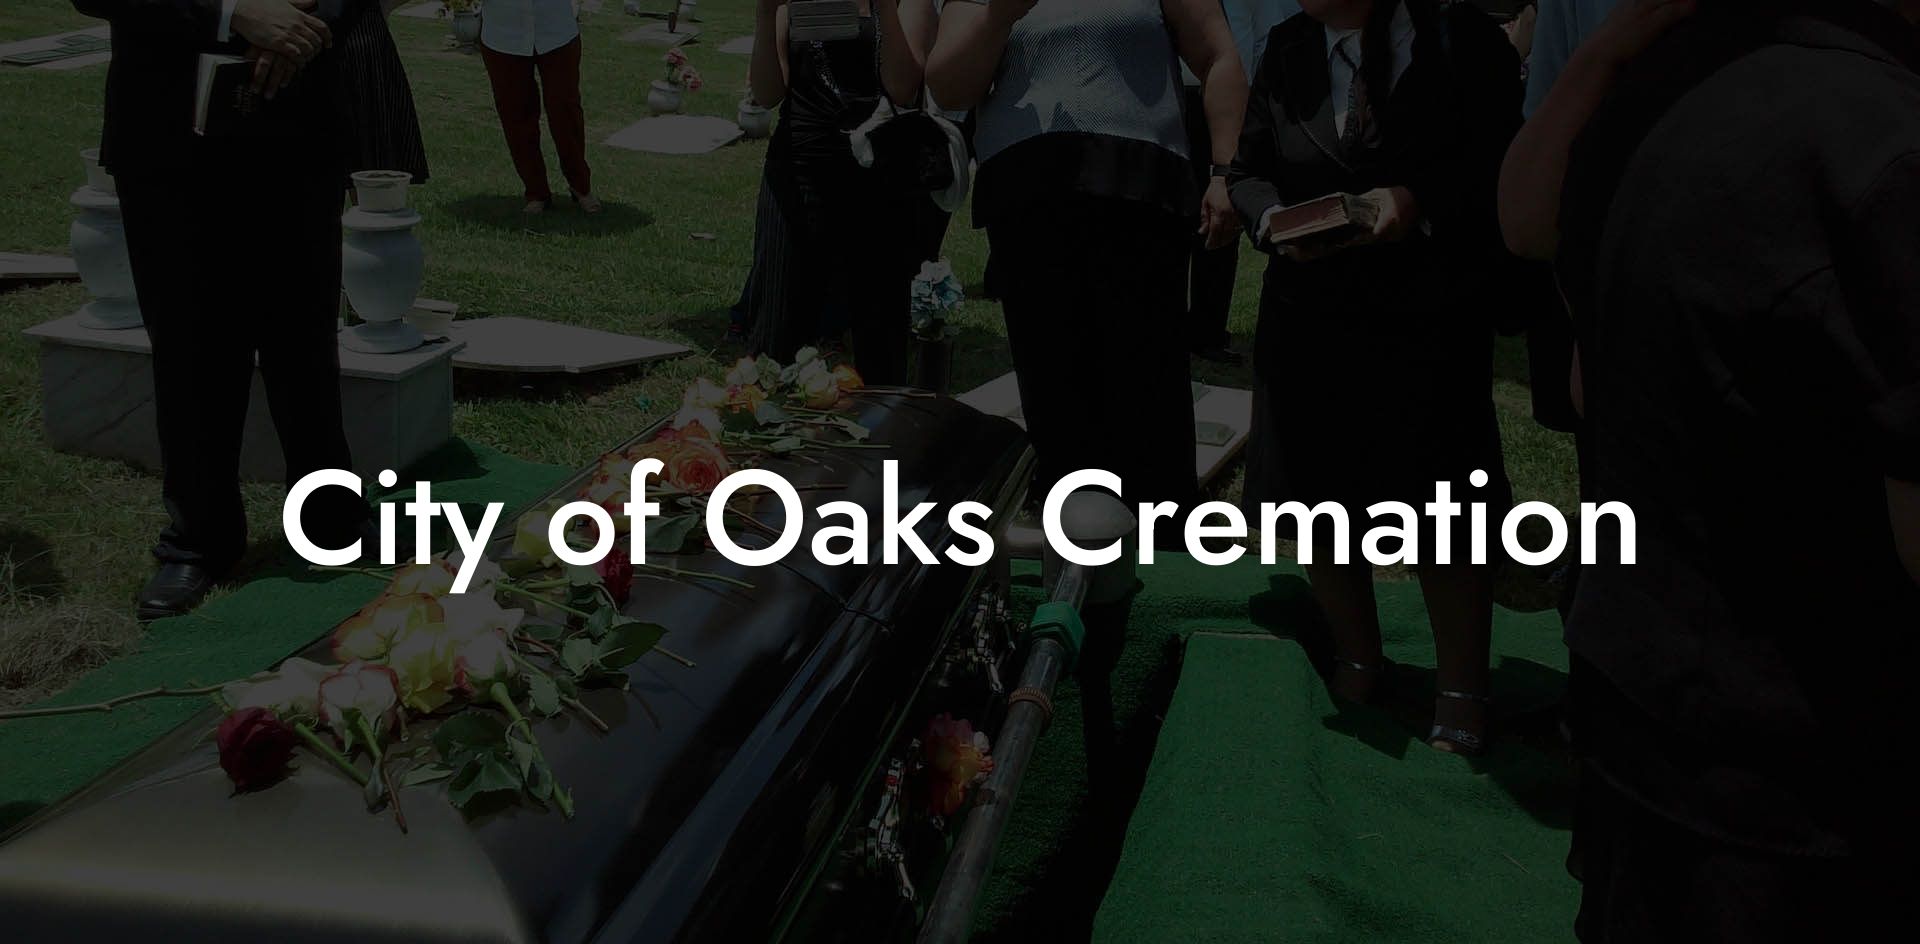 City of Oaks Cremation